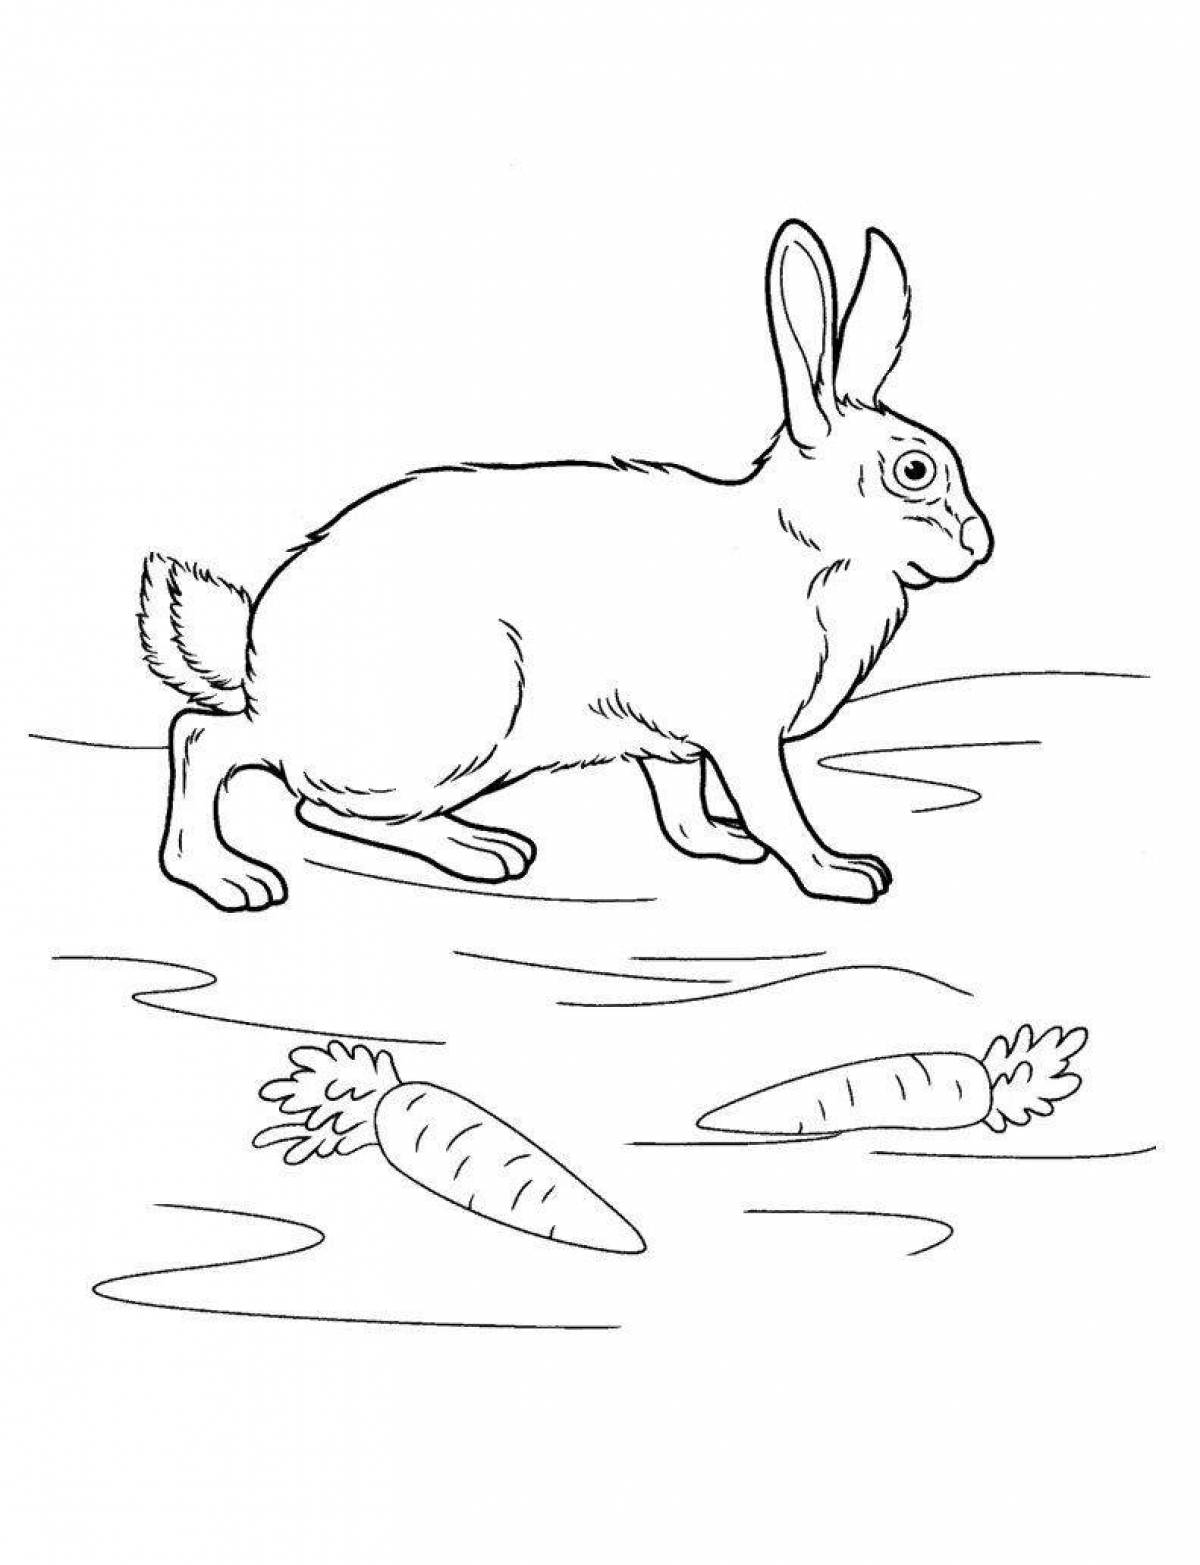 Coloring page dazzling hunters and rabbits